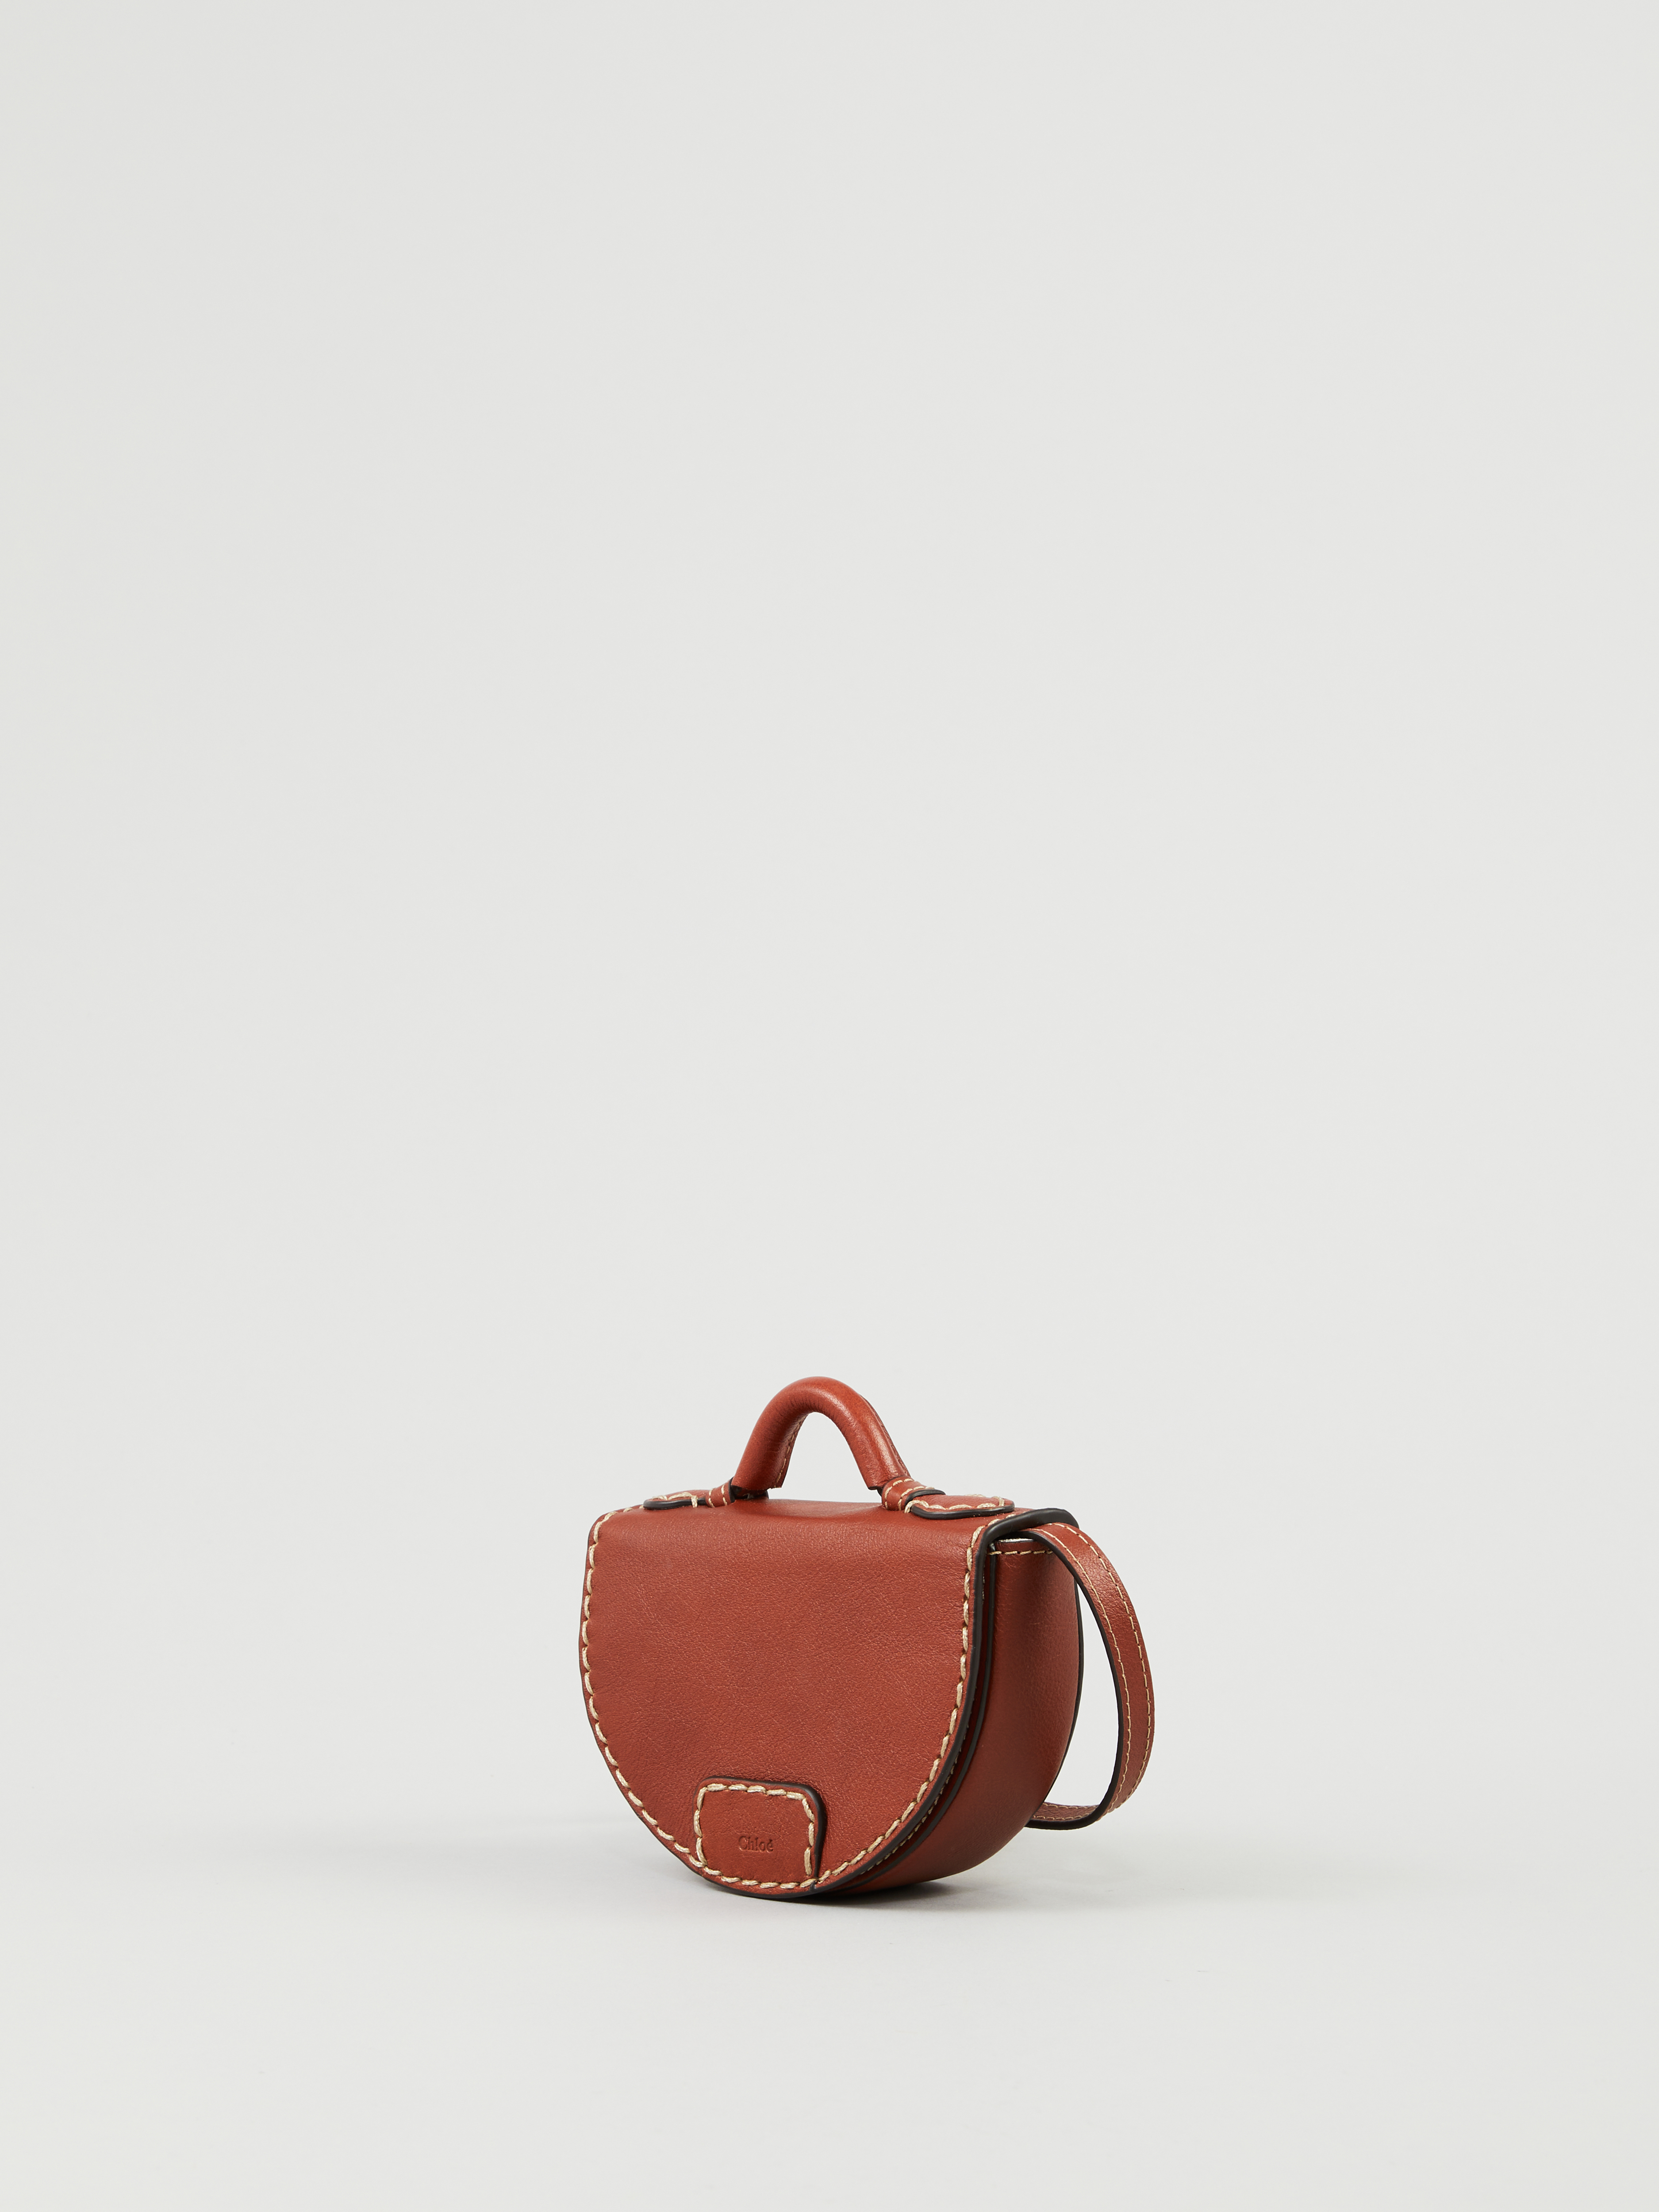 Chloé - Edith Sepia Brown Leather Phone Pouch